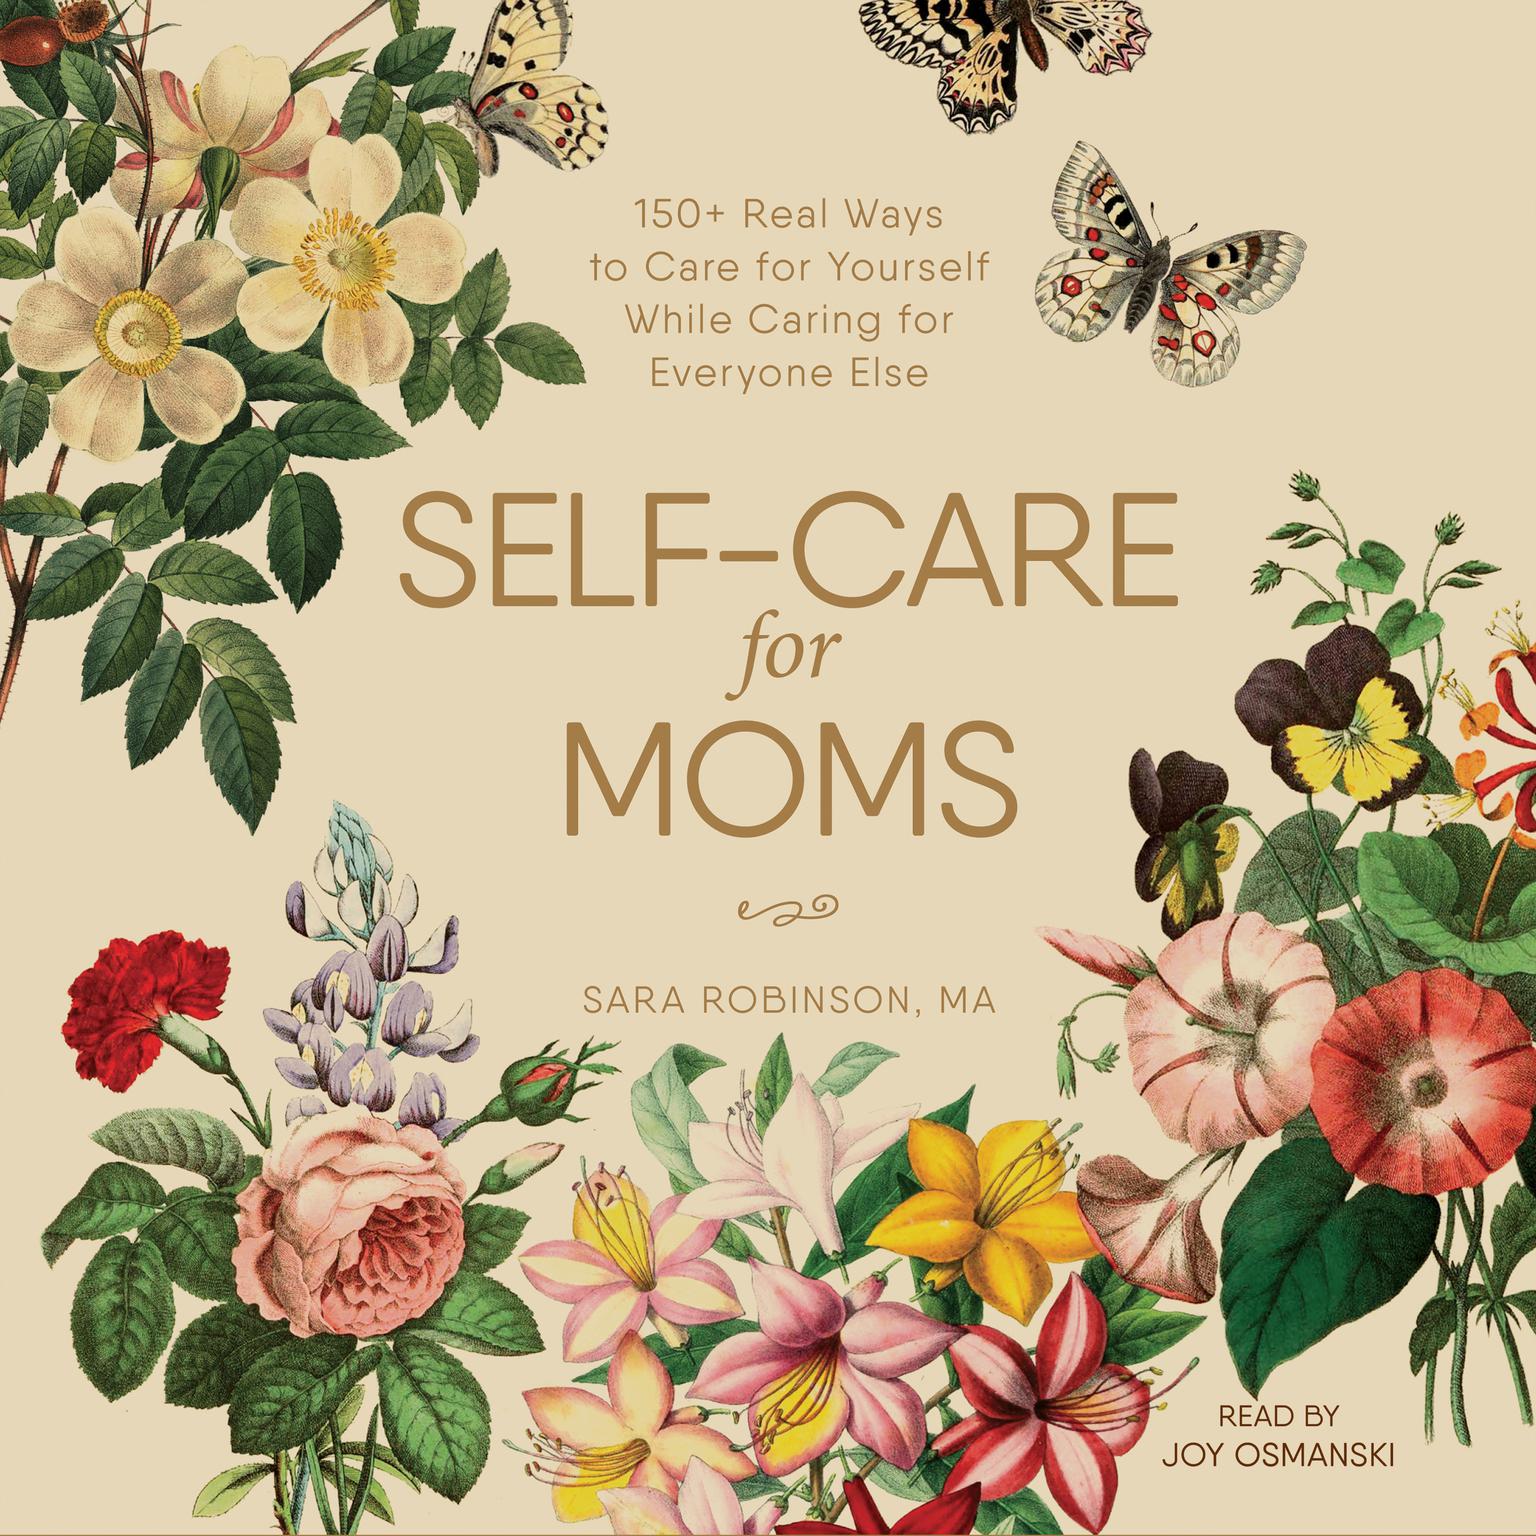 Self-Care for Moms: 150+ Real Ways to Care for Yourself While Caring for Everyone Else Audiobook, by Sara Robinson